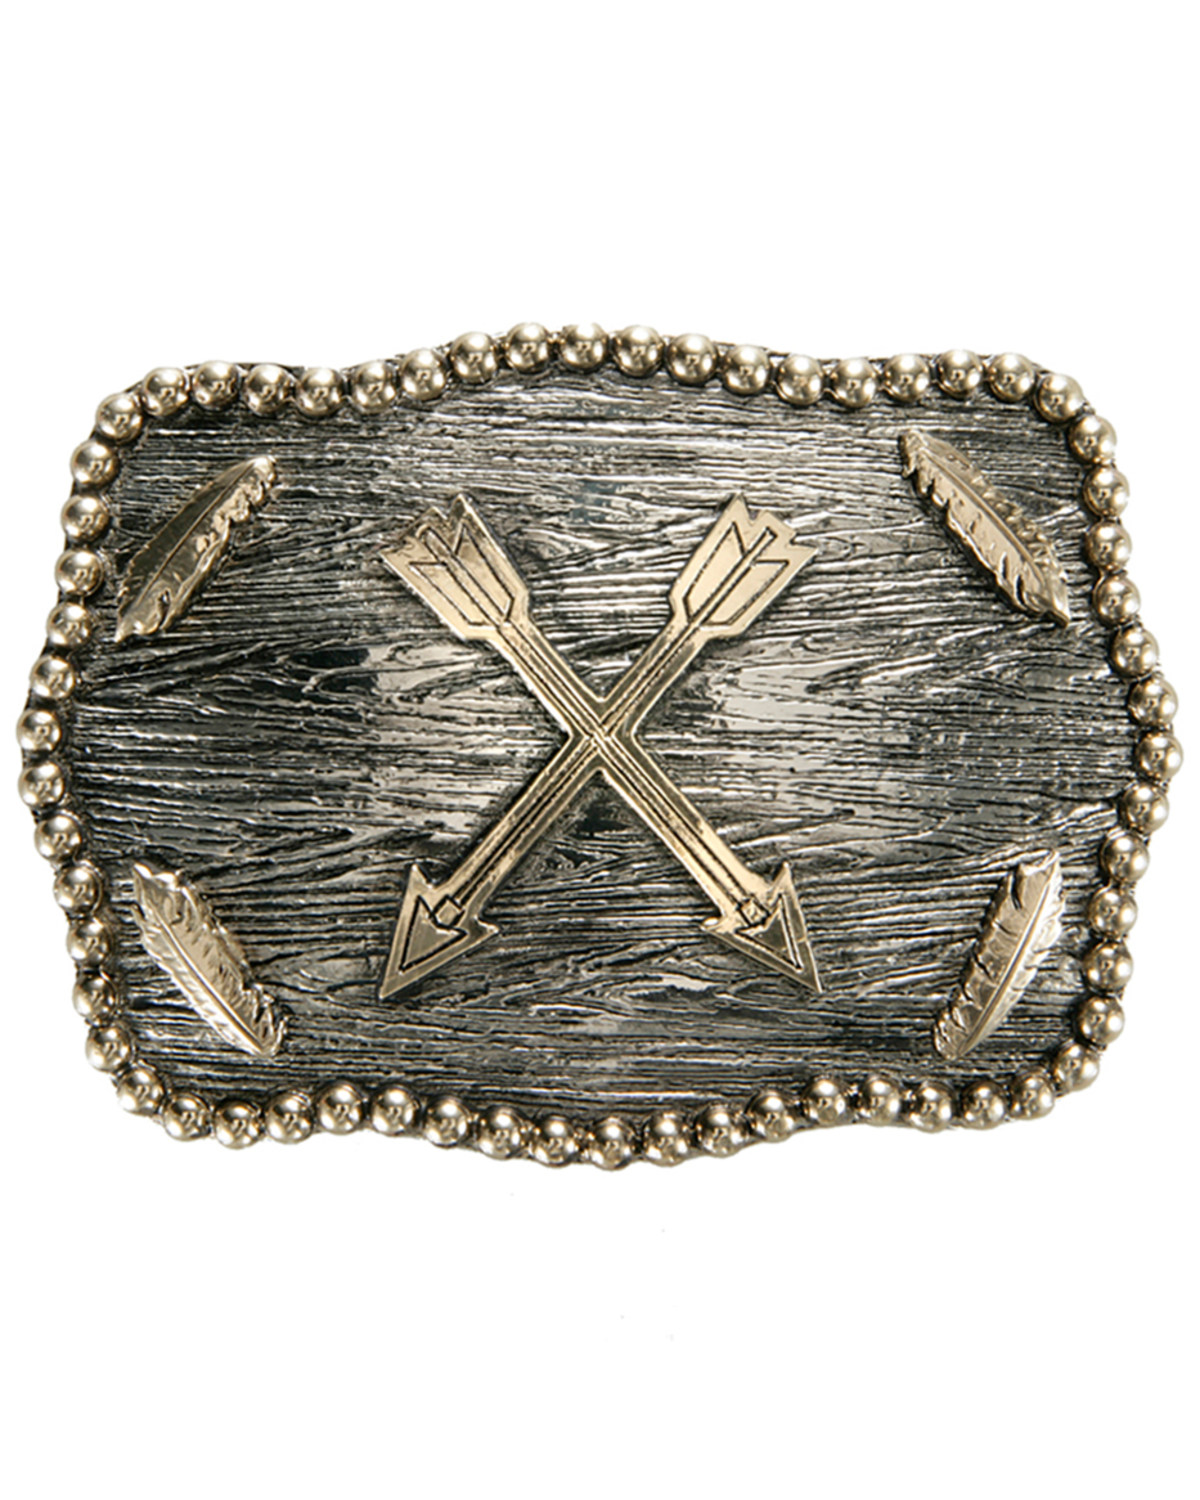 AndWest Crossed Arrows Iconic Buckle